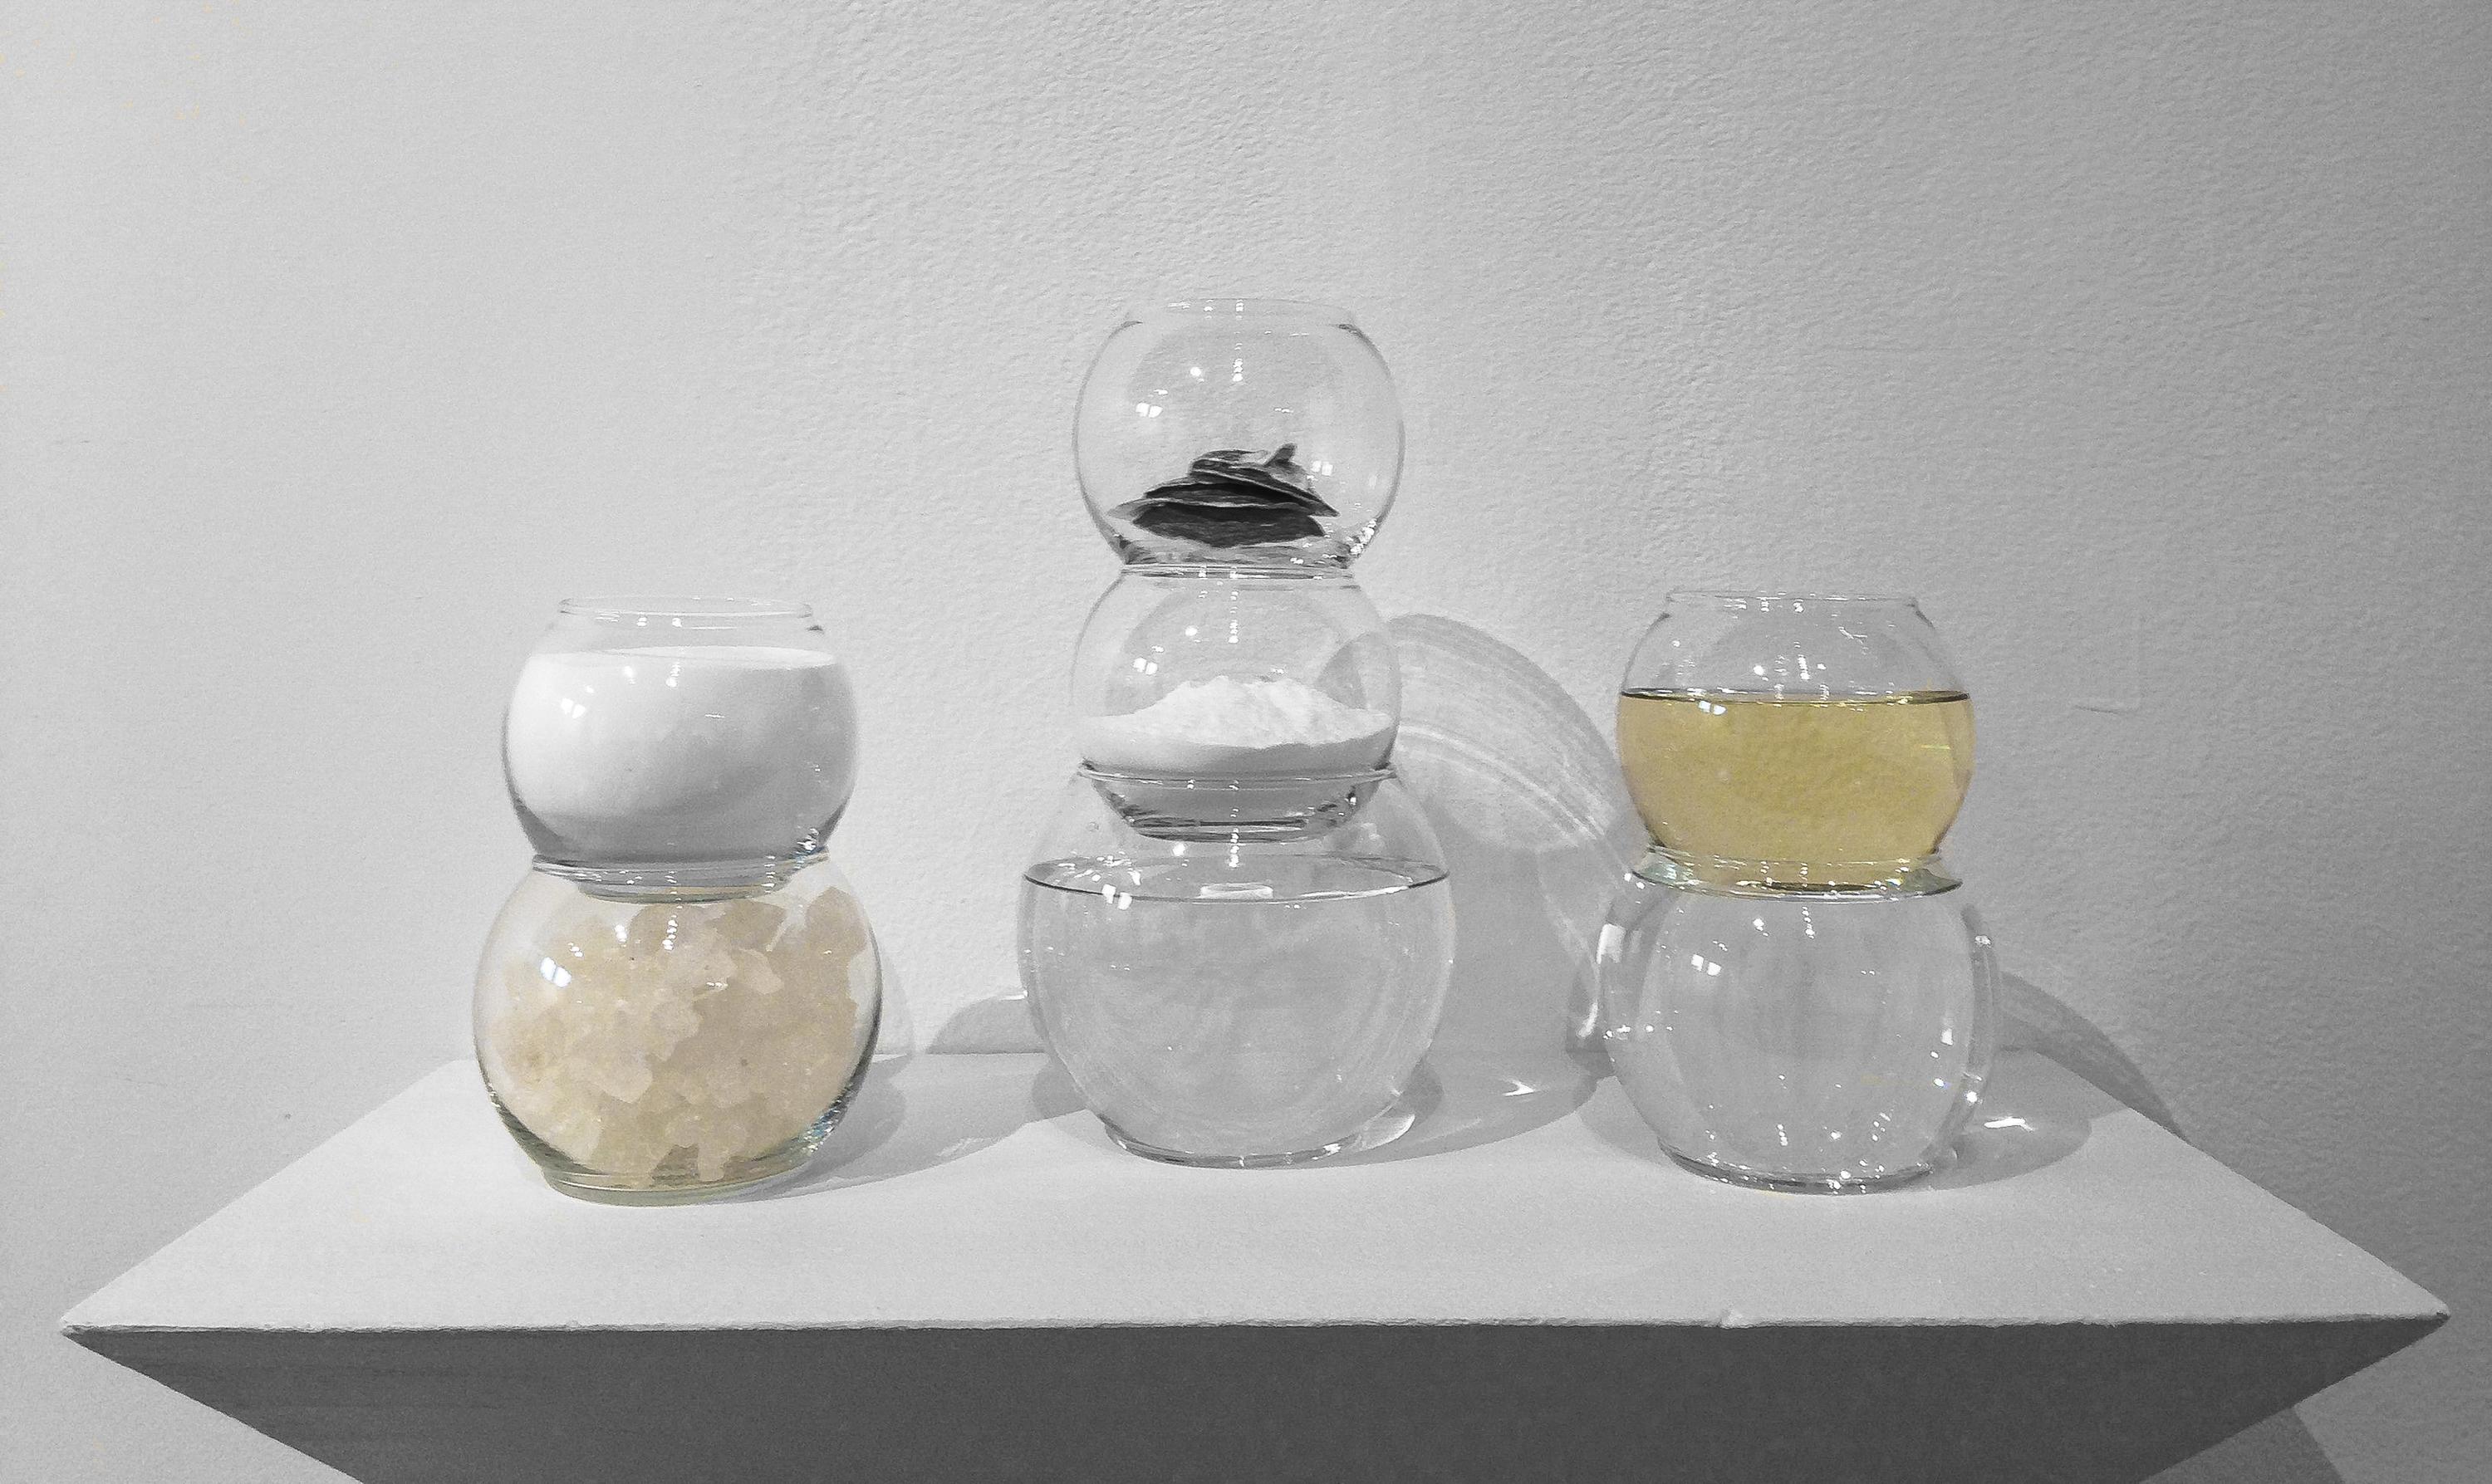 Seven fish bowls are filled with different substances and sit on top of a shelf.